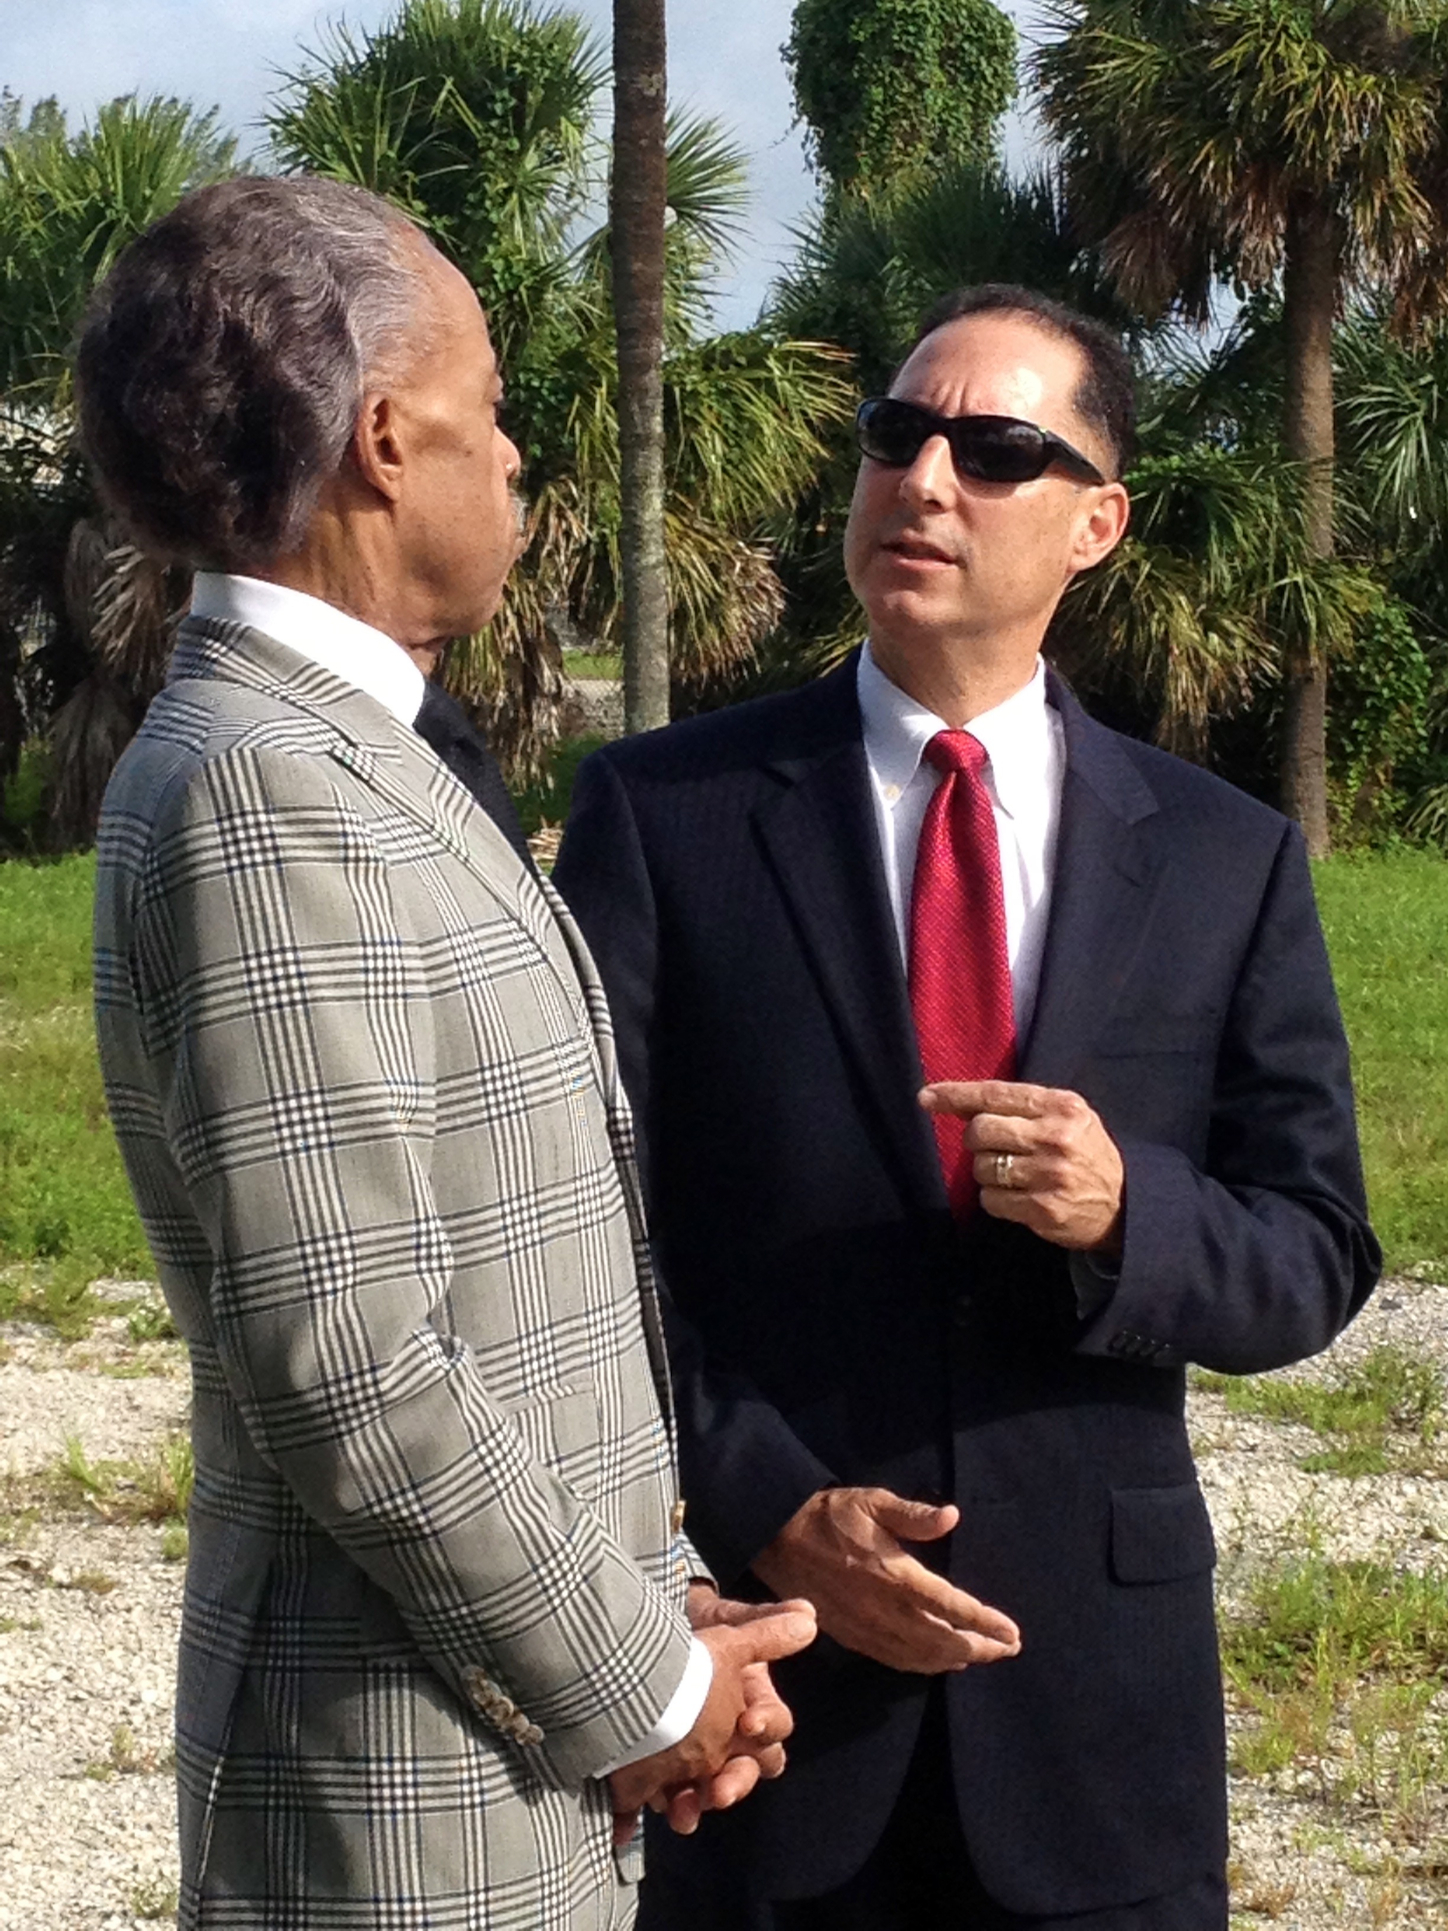 Ken Padowitz speaks to Al Sharpton on law during filming of a Documentary